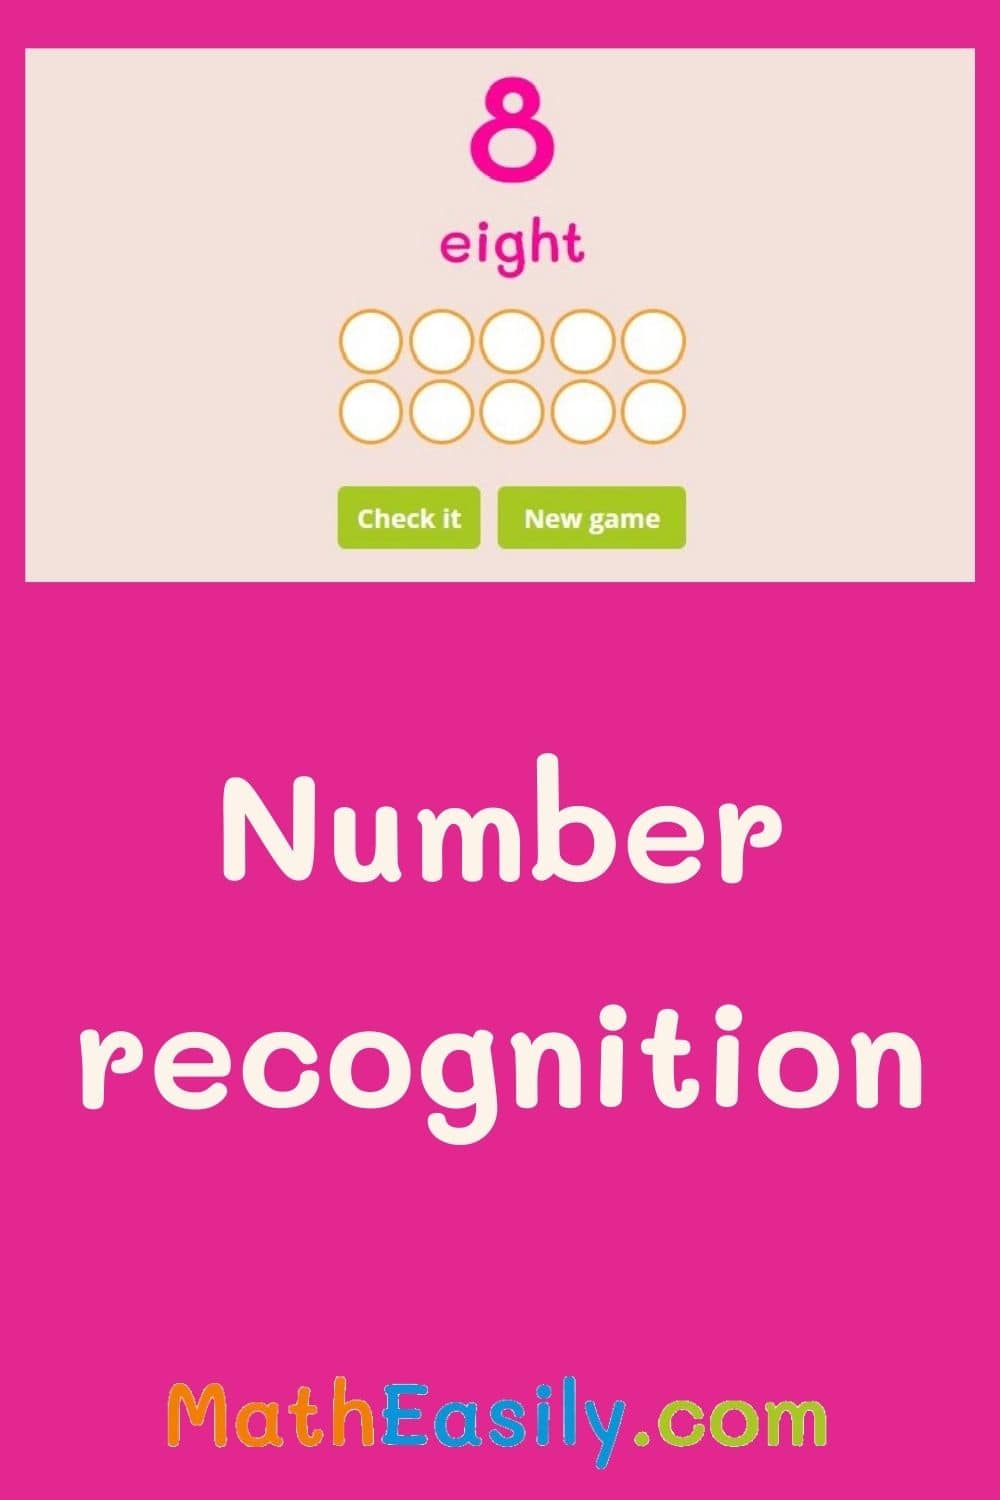 Free number recognition games for preschoolers. Counting and number recognition online games. Recognising numbers to 10. number identification online games.
 Games for number recognition 1 10. Preschool number recognition games online free. Recognition of numbers 1 to 10. number recognition games 1-10 online.
 Number identification games for kindergarten. Pre k number recognition kindergarten. Play number recognition interactive games.